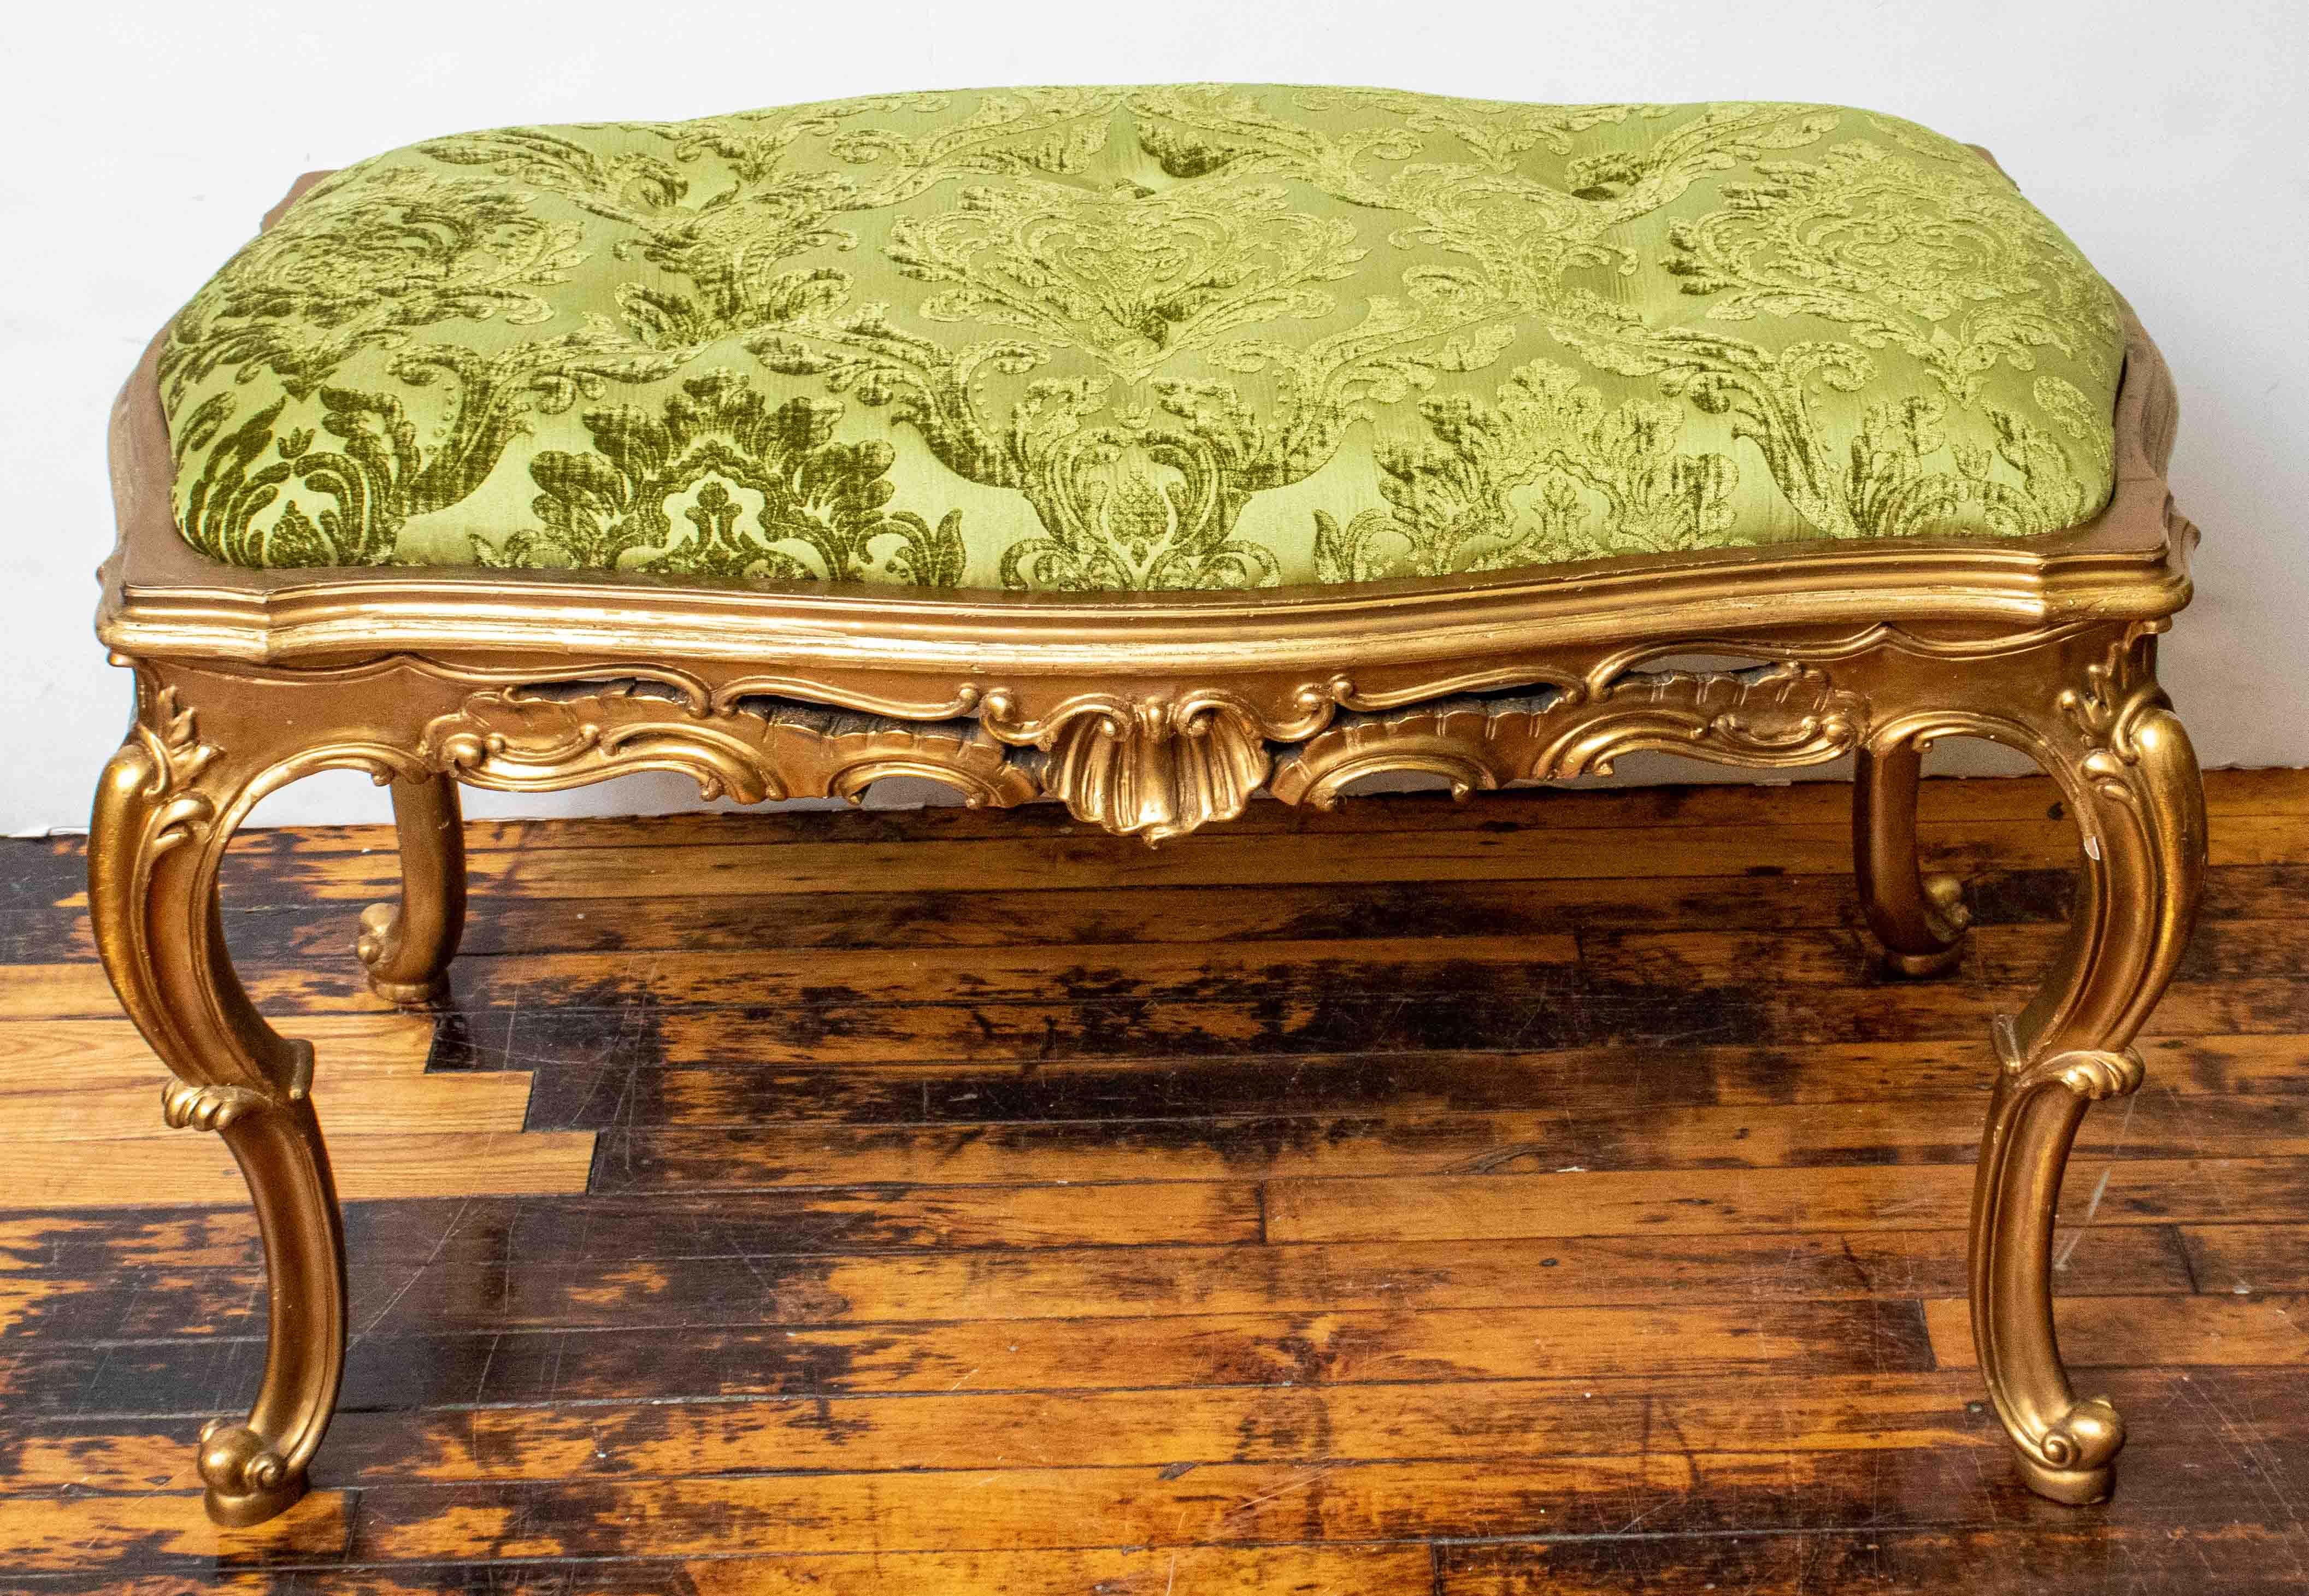 Beautiful Italian wood gilt bench with cushion insert. Made in the 1950's. Cushion was newly upholstered with a grass green cut velvet damask fabric.